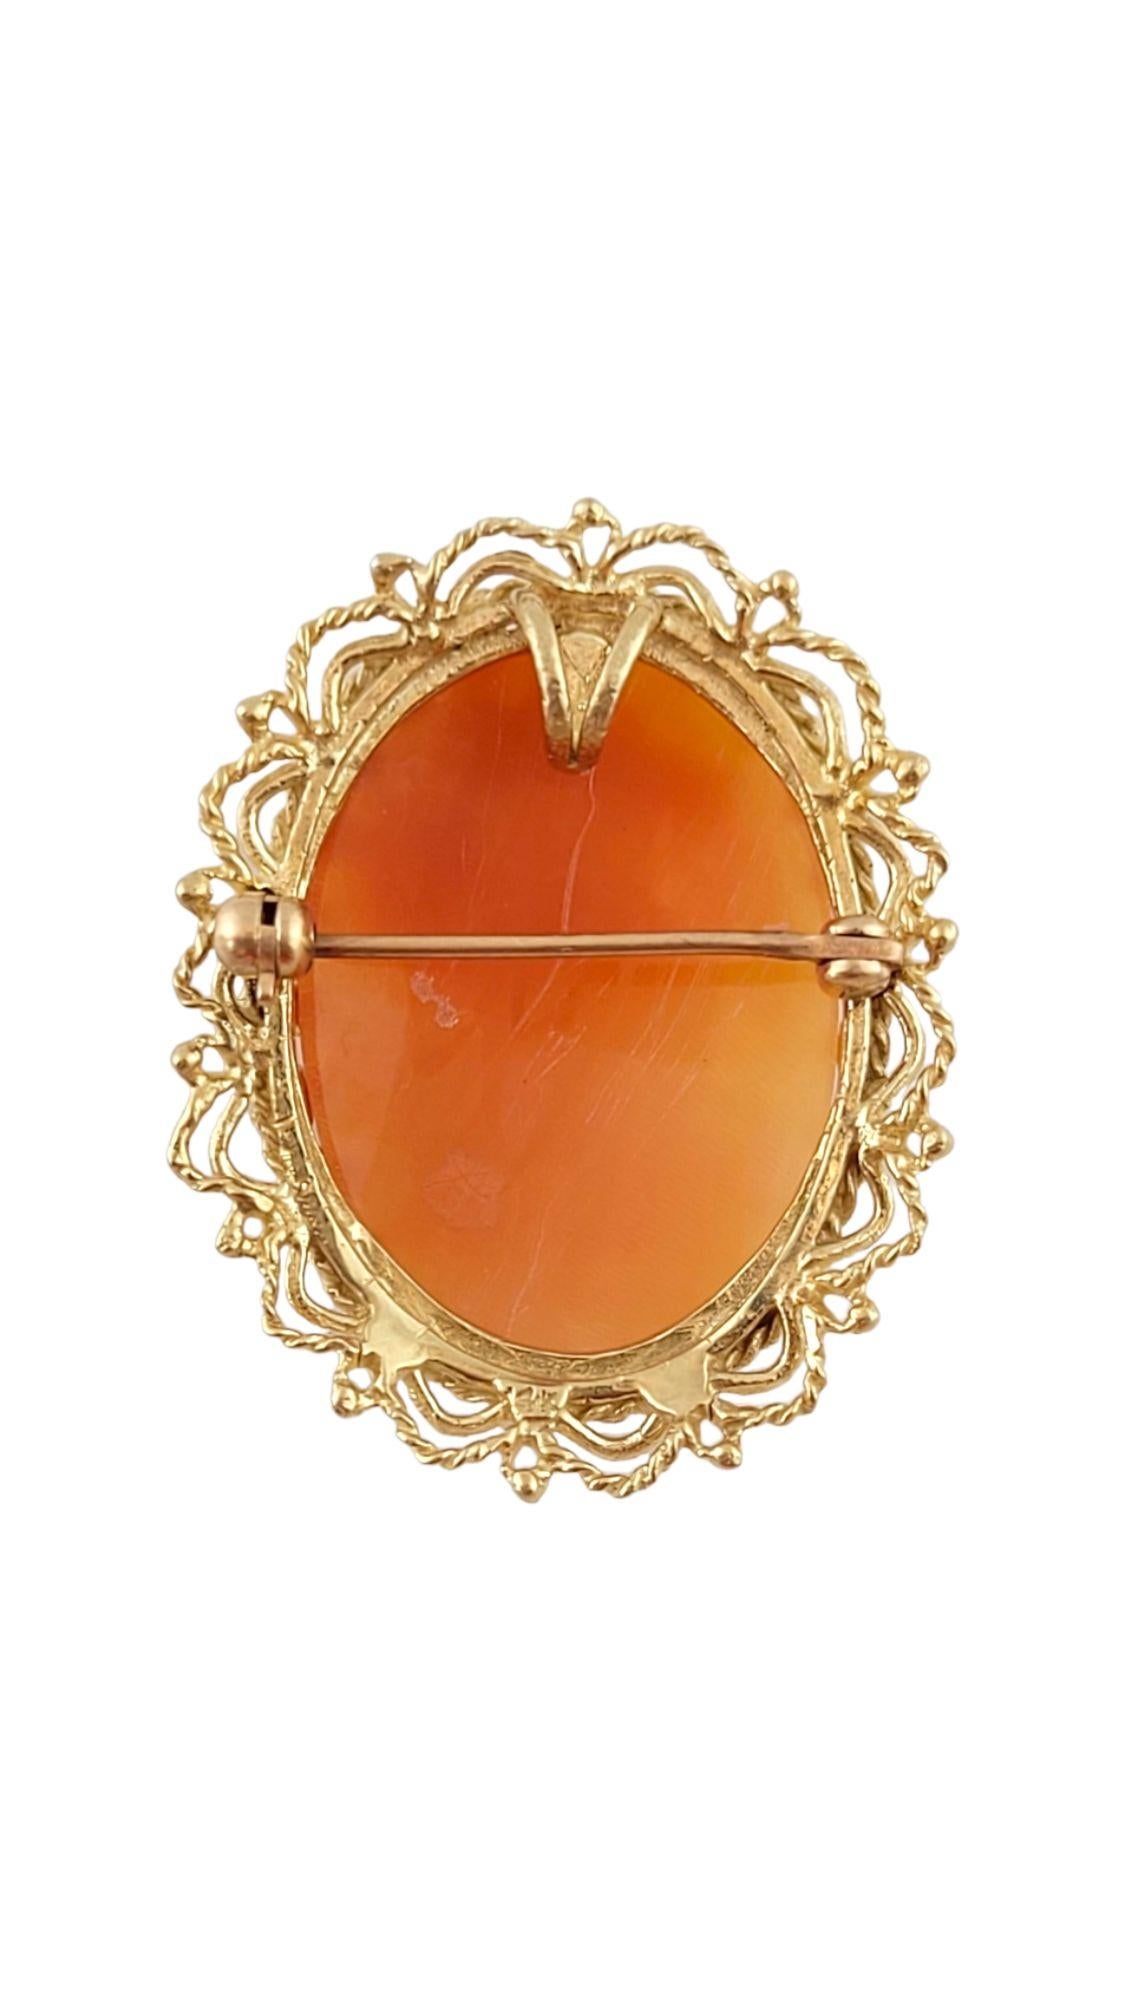 Women's 14K Yellow Gold Cameo Pin/Pendant #14667 For Sale